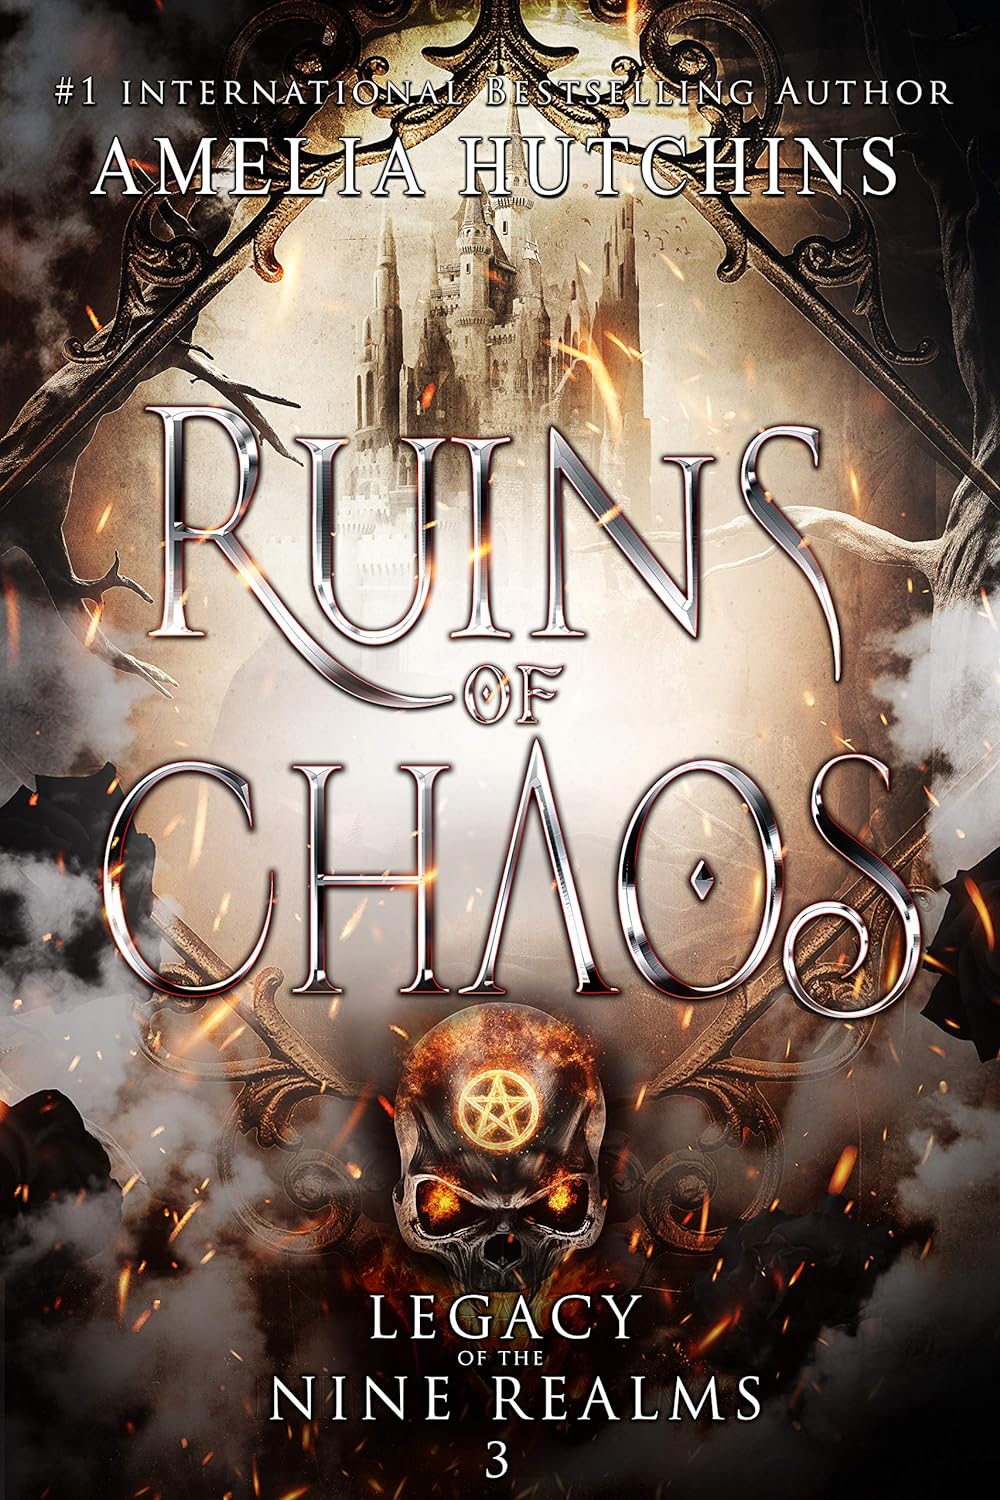 Ruins of Chaos (Legacy of the Nine Realms Book 3) by Amelia Hutchins